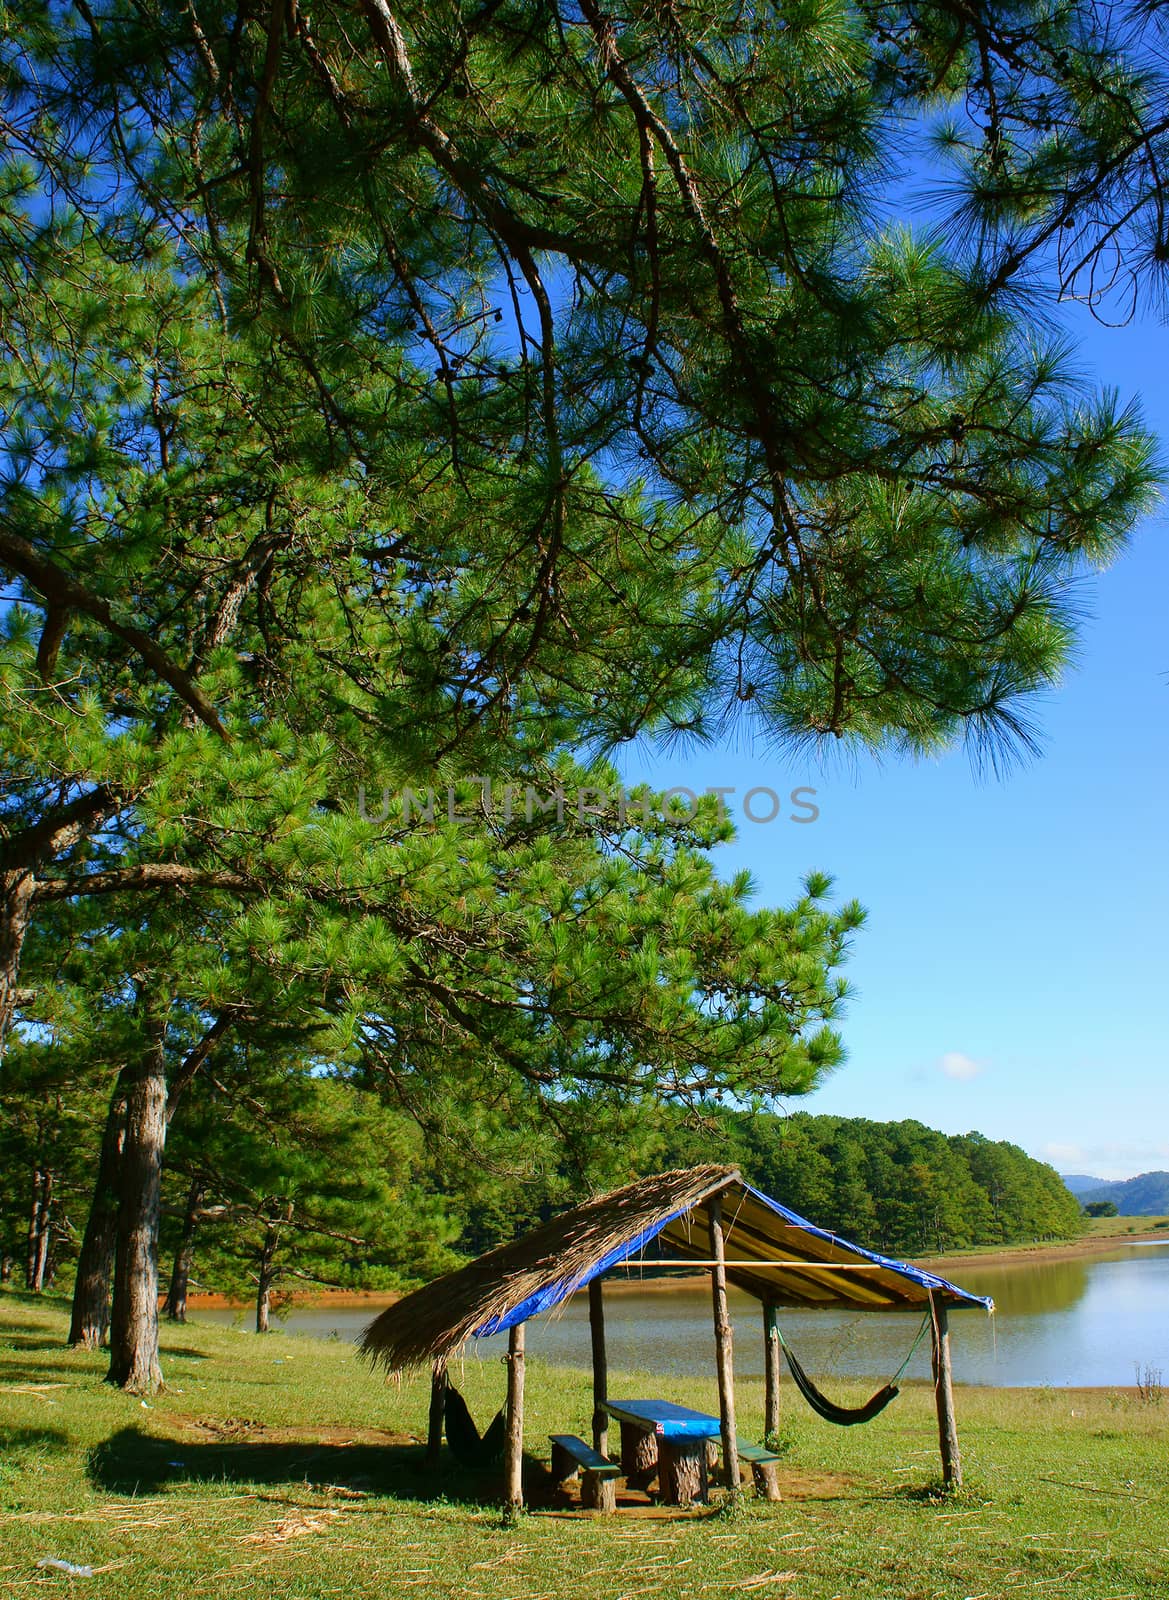 Dalat countryside landscape, Suoi Vang, place for travel, camp under pine tree among pine forest, beautiful scene for ecotourism at Da Lat, Vietnam, fresh air, green grass, harmony nature